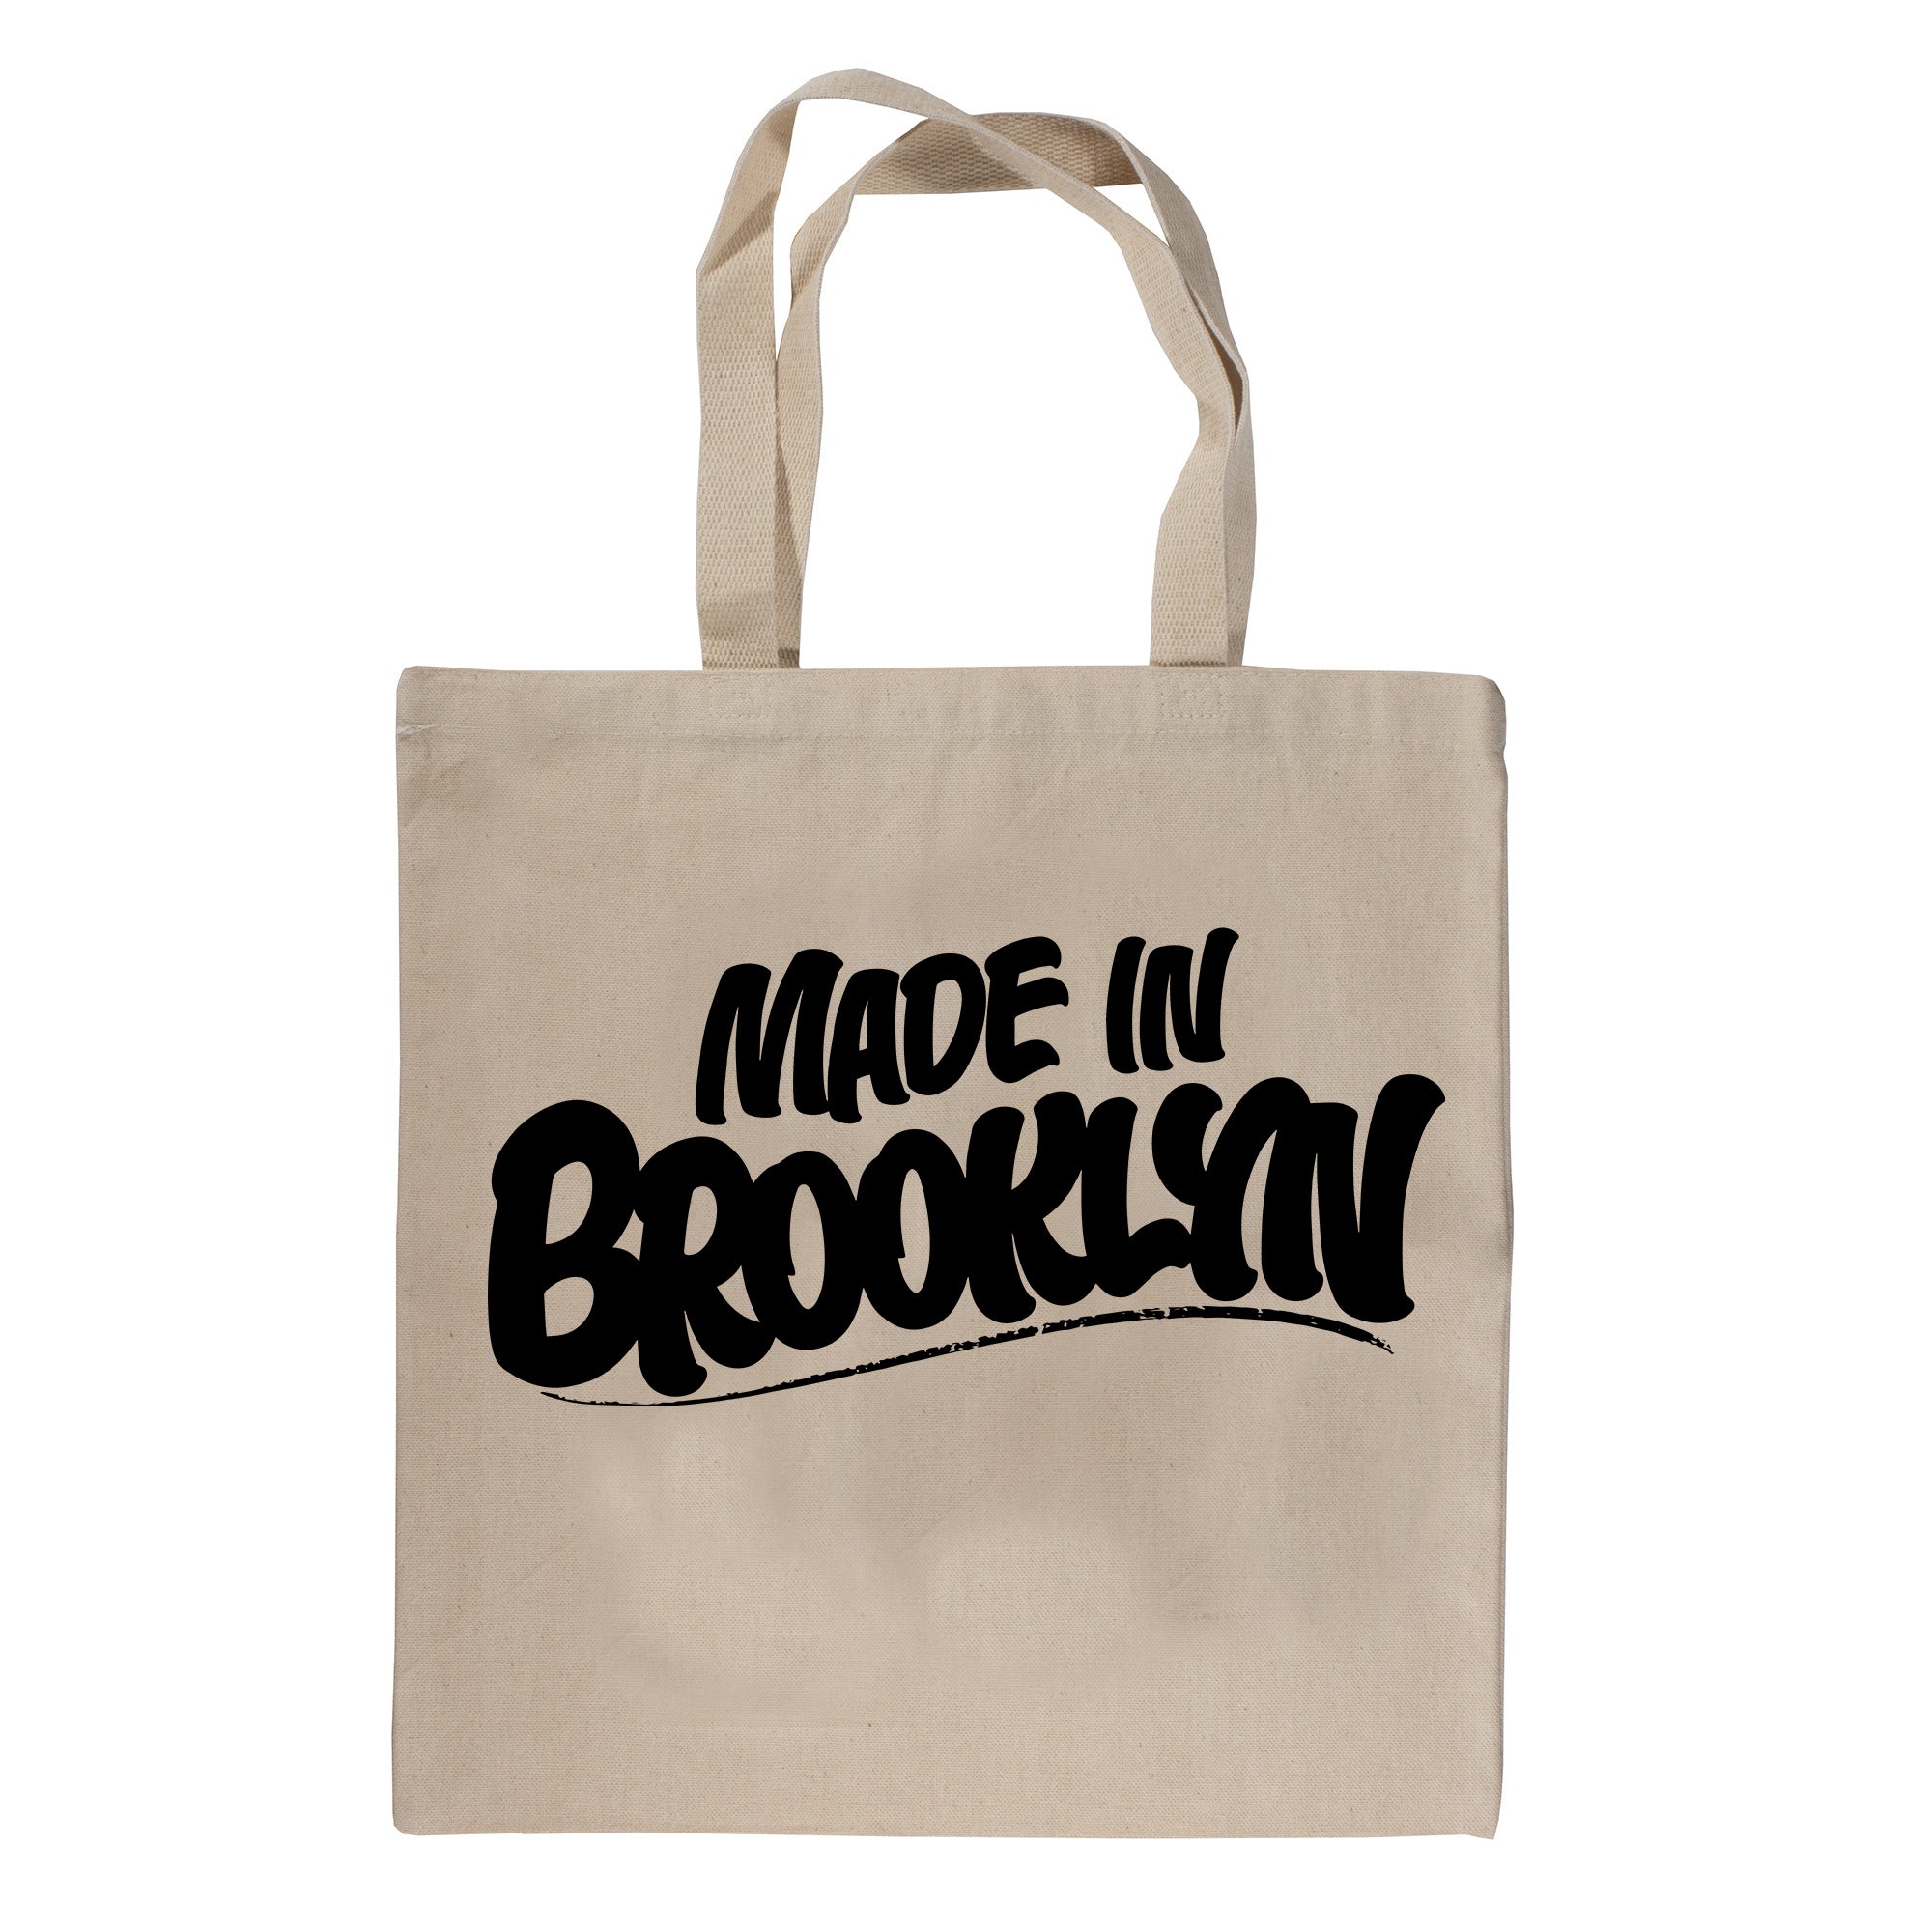 Made In Brooklyn Canvas Tote Bag